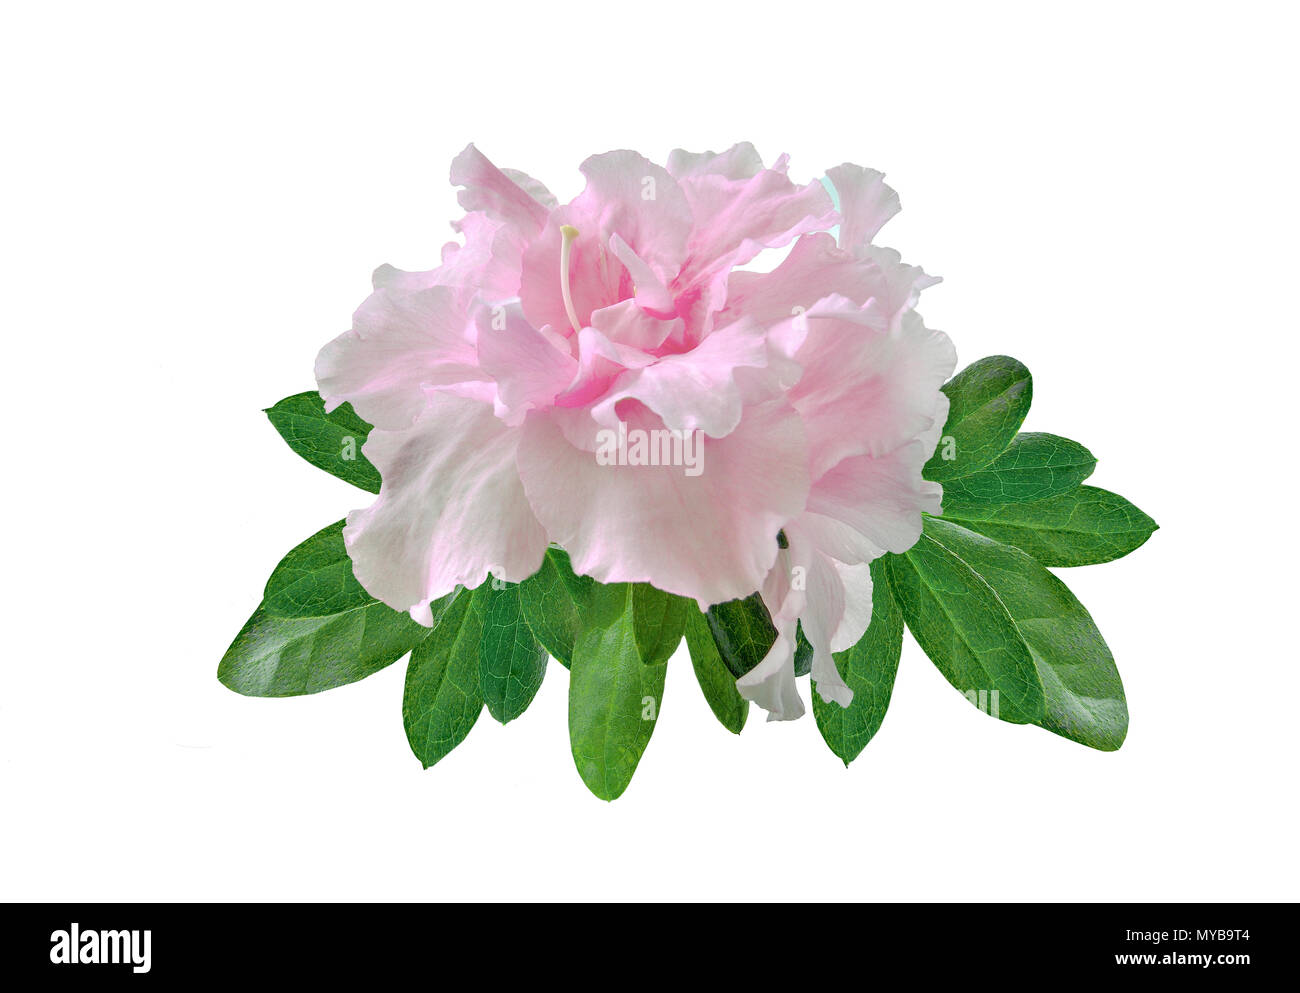 Delicate light pink Azalea flower (Rhododendron) with leaves close up, isolated on a white background - amazingly beautiful ornamental plant, floral p Stock Photo